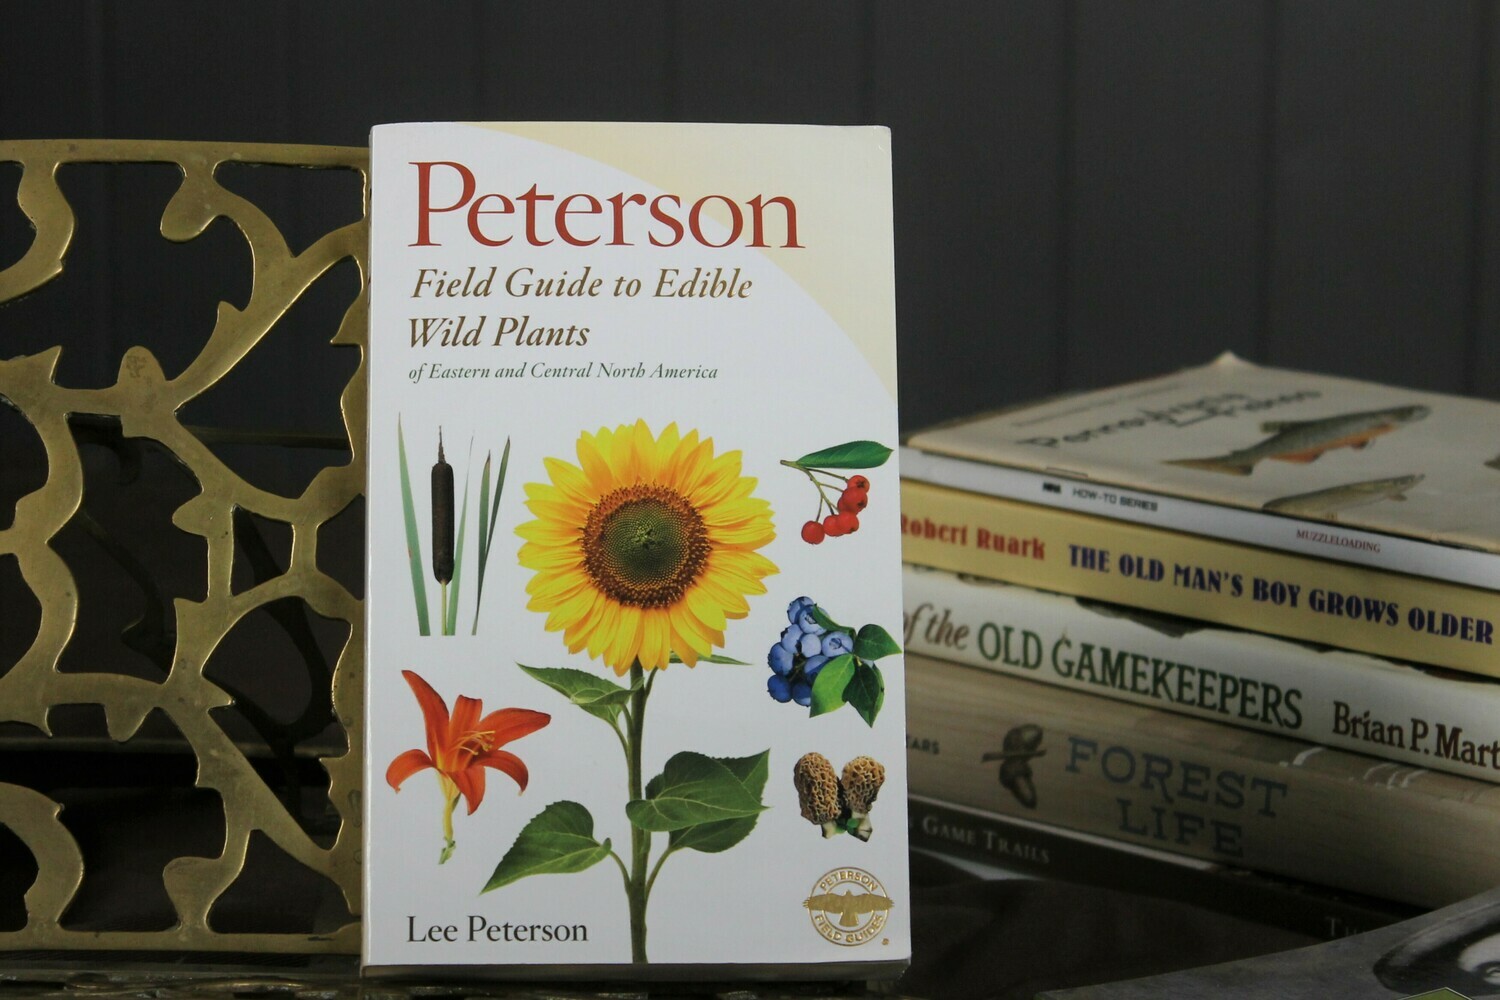 Peterson Field Guide to Edible Wild Plants by Lee Peterson